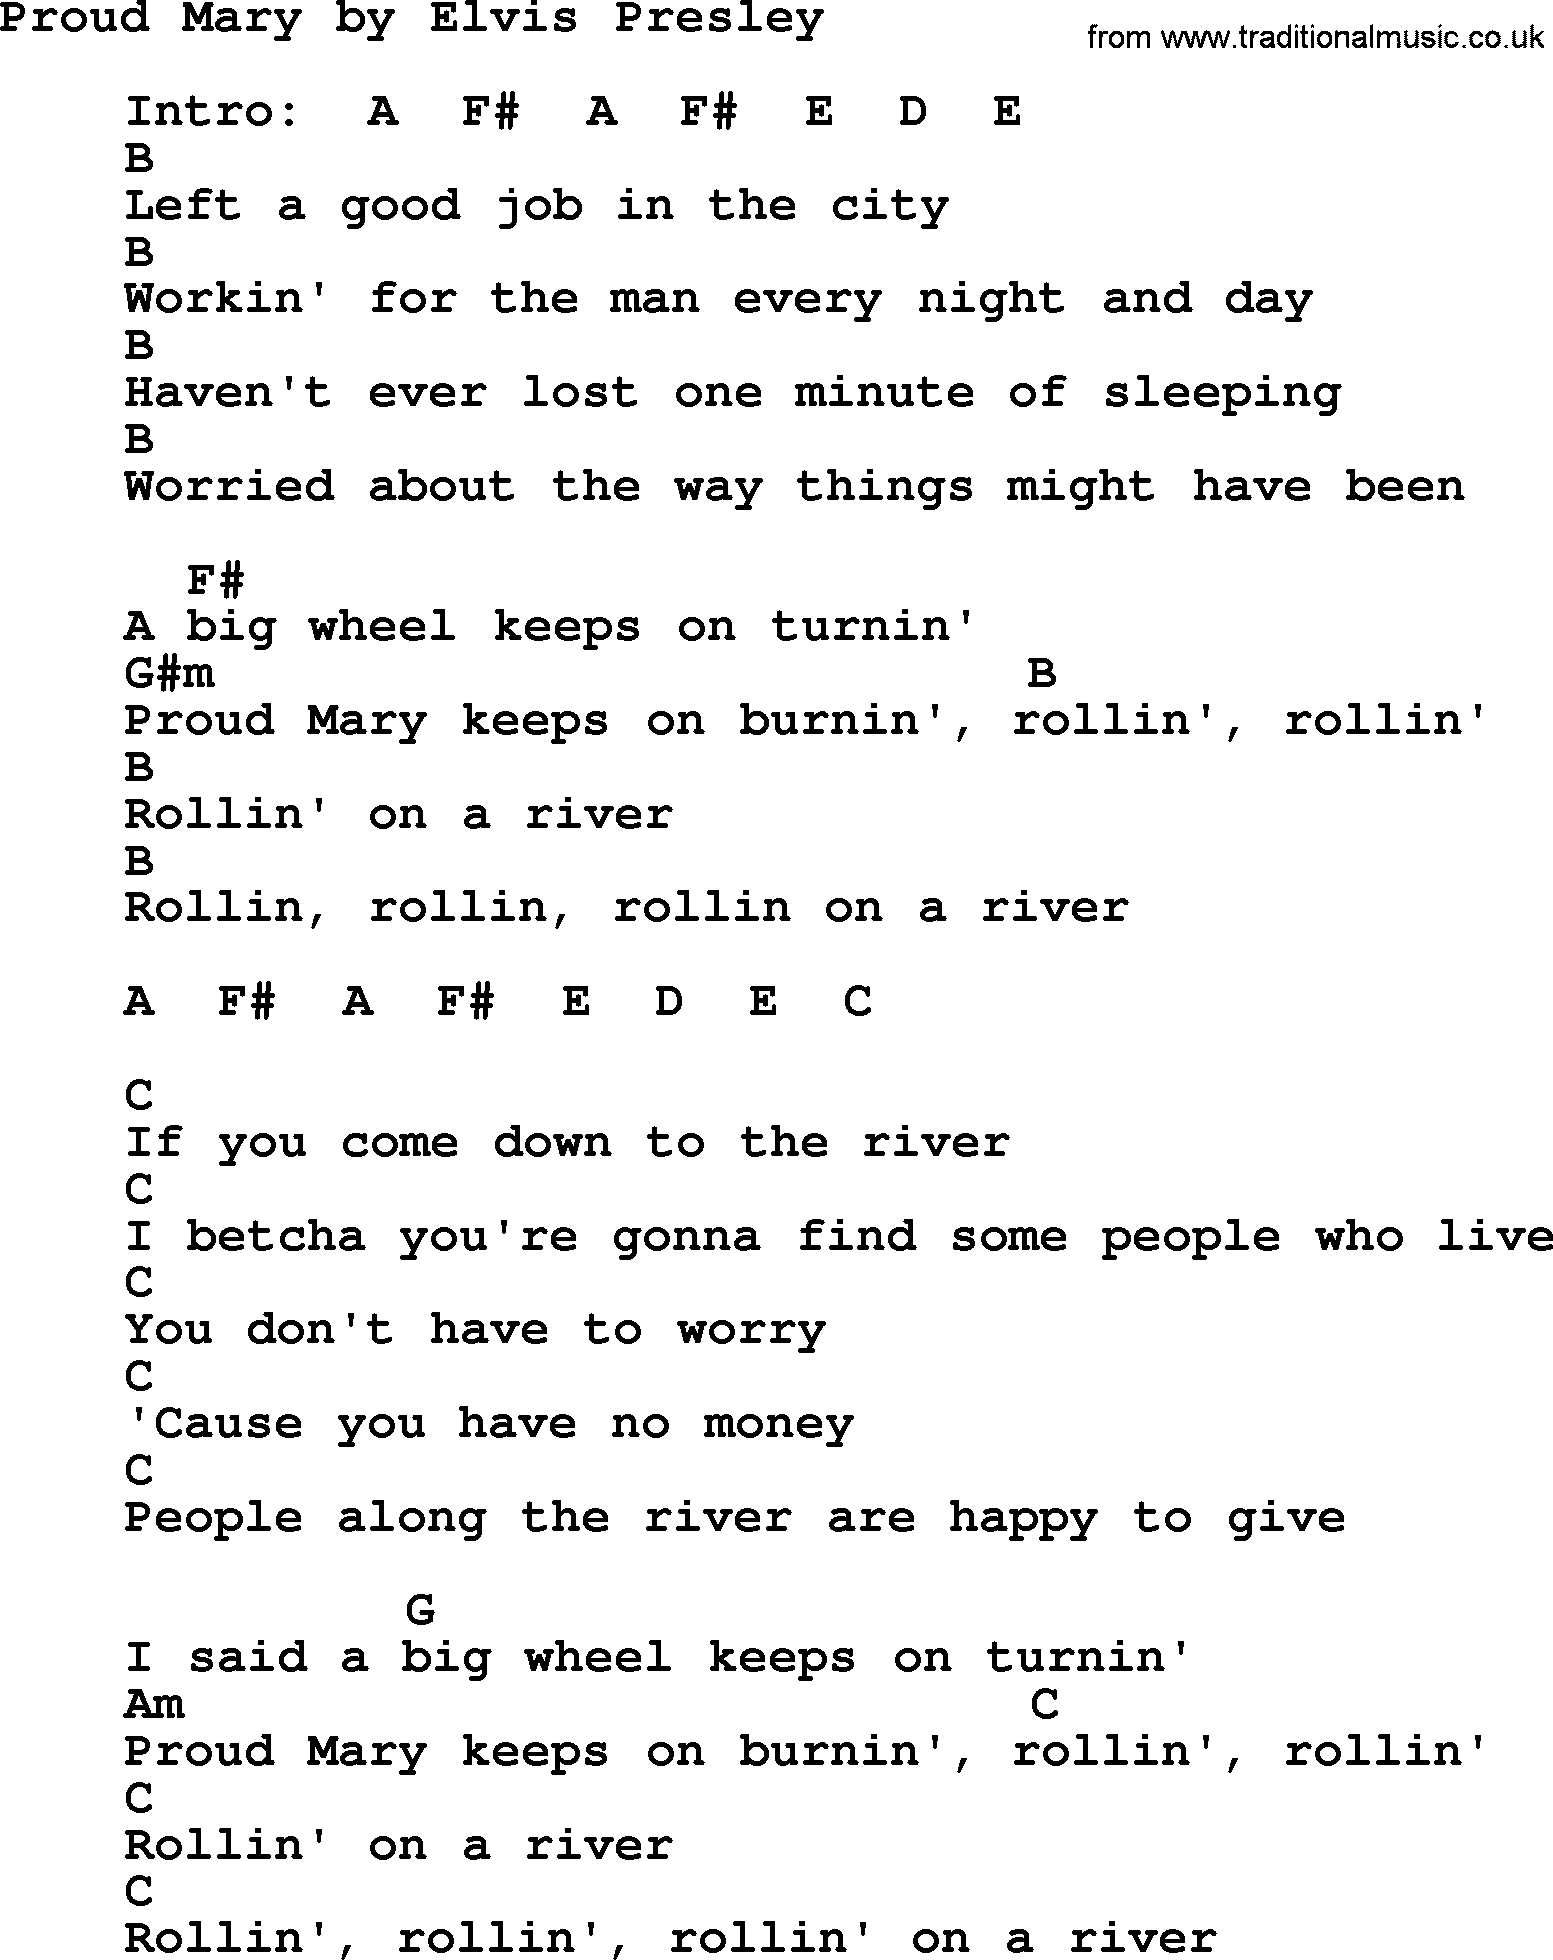 Elvis Presley song: Proud Mary, lyrics and chords